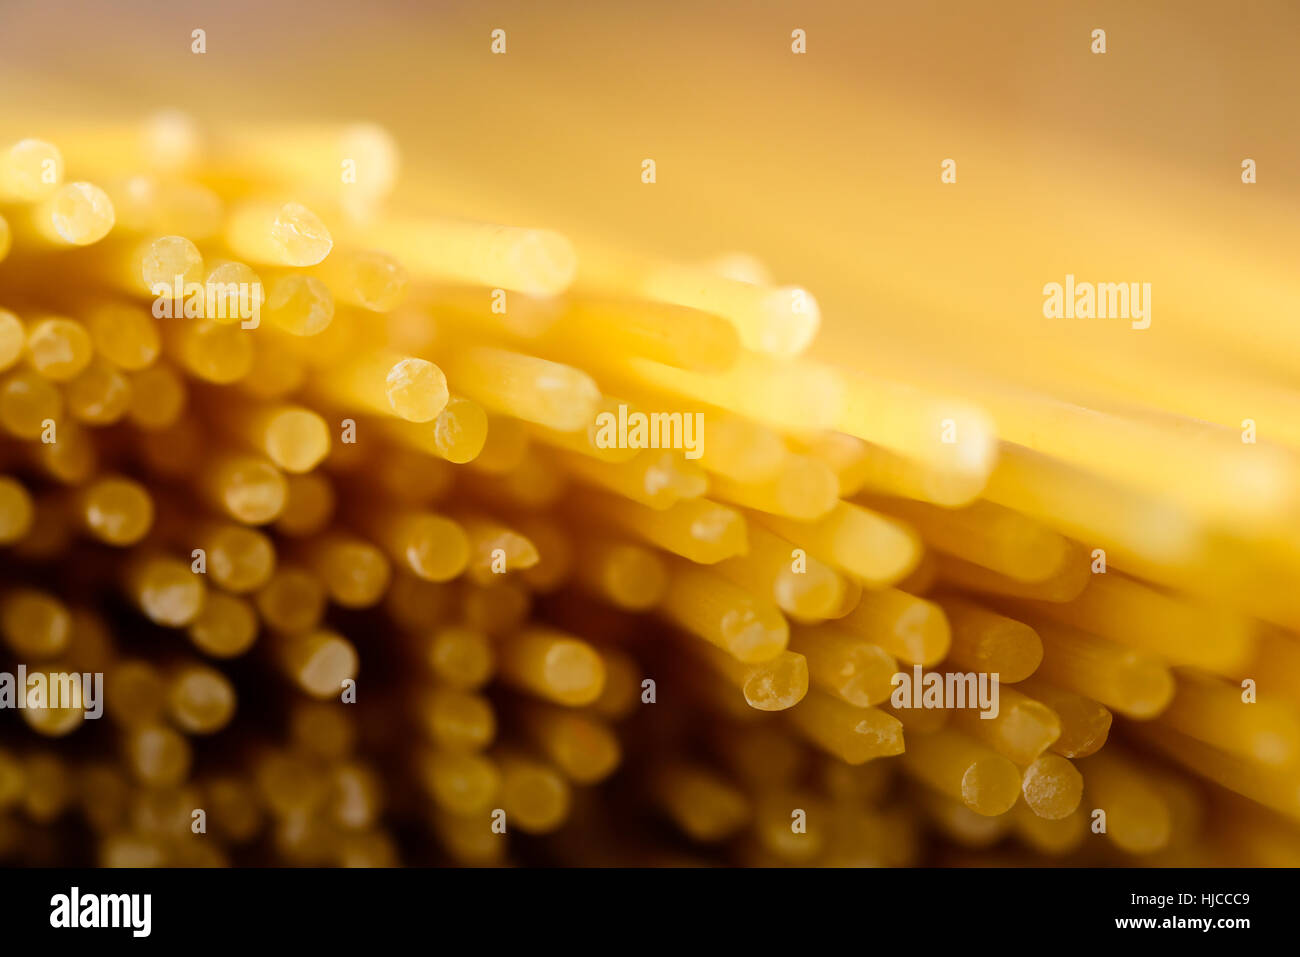 Abstract of dry and uncooked spaghetti with shallow focus on ends Stock Photo